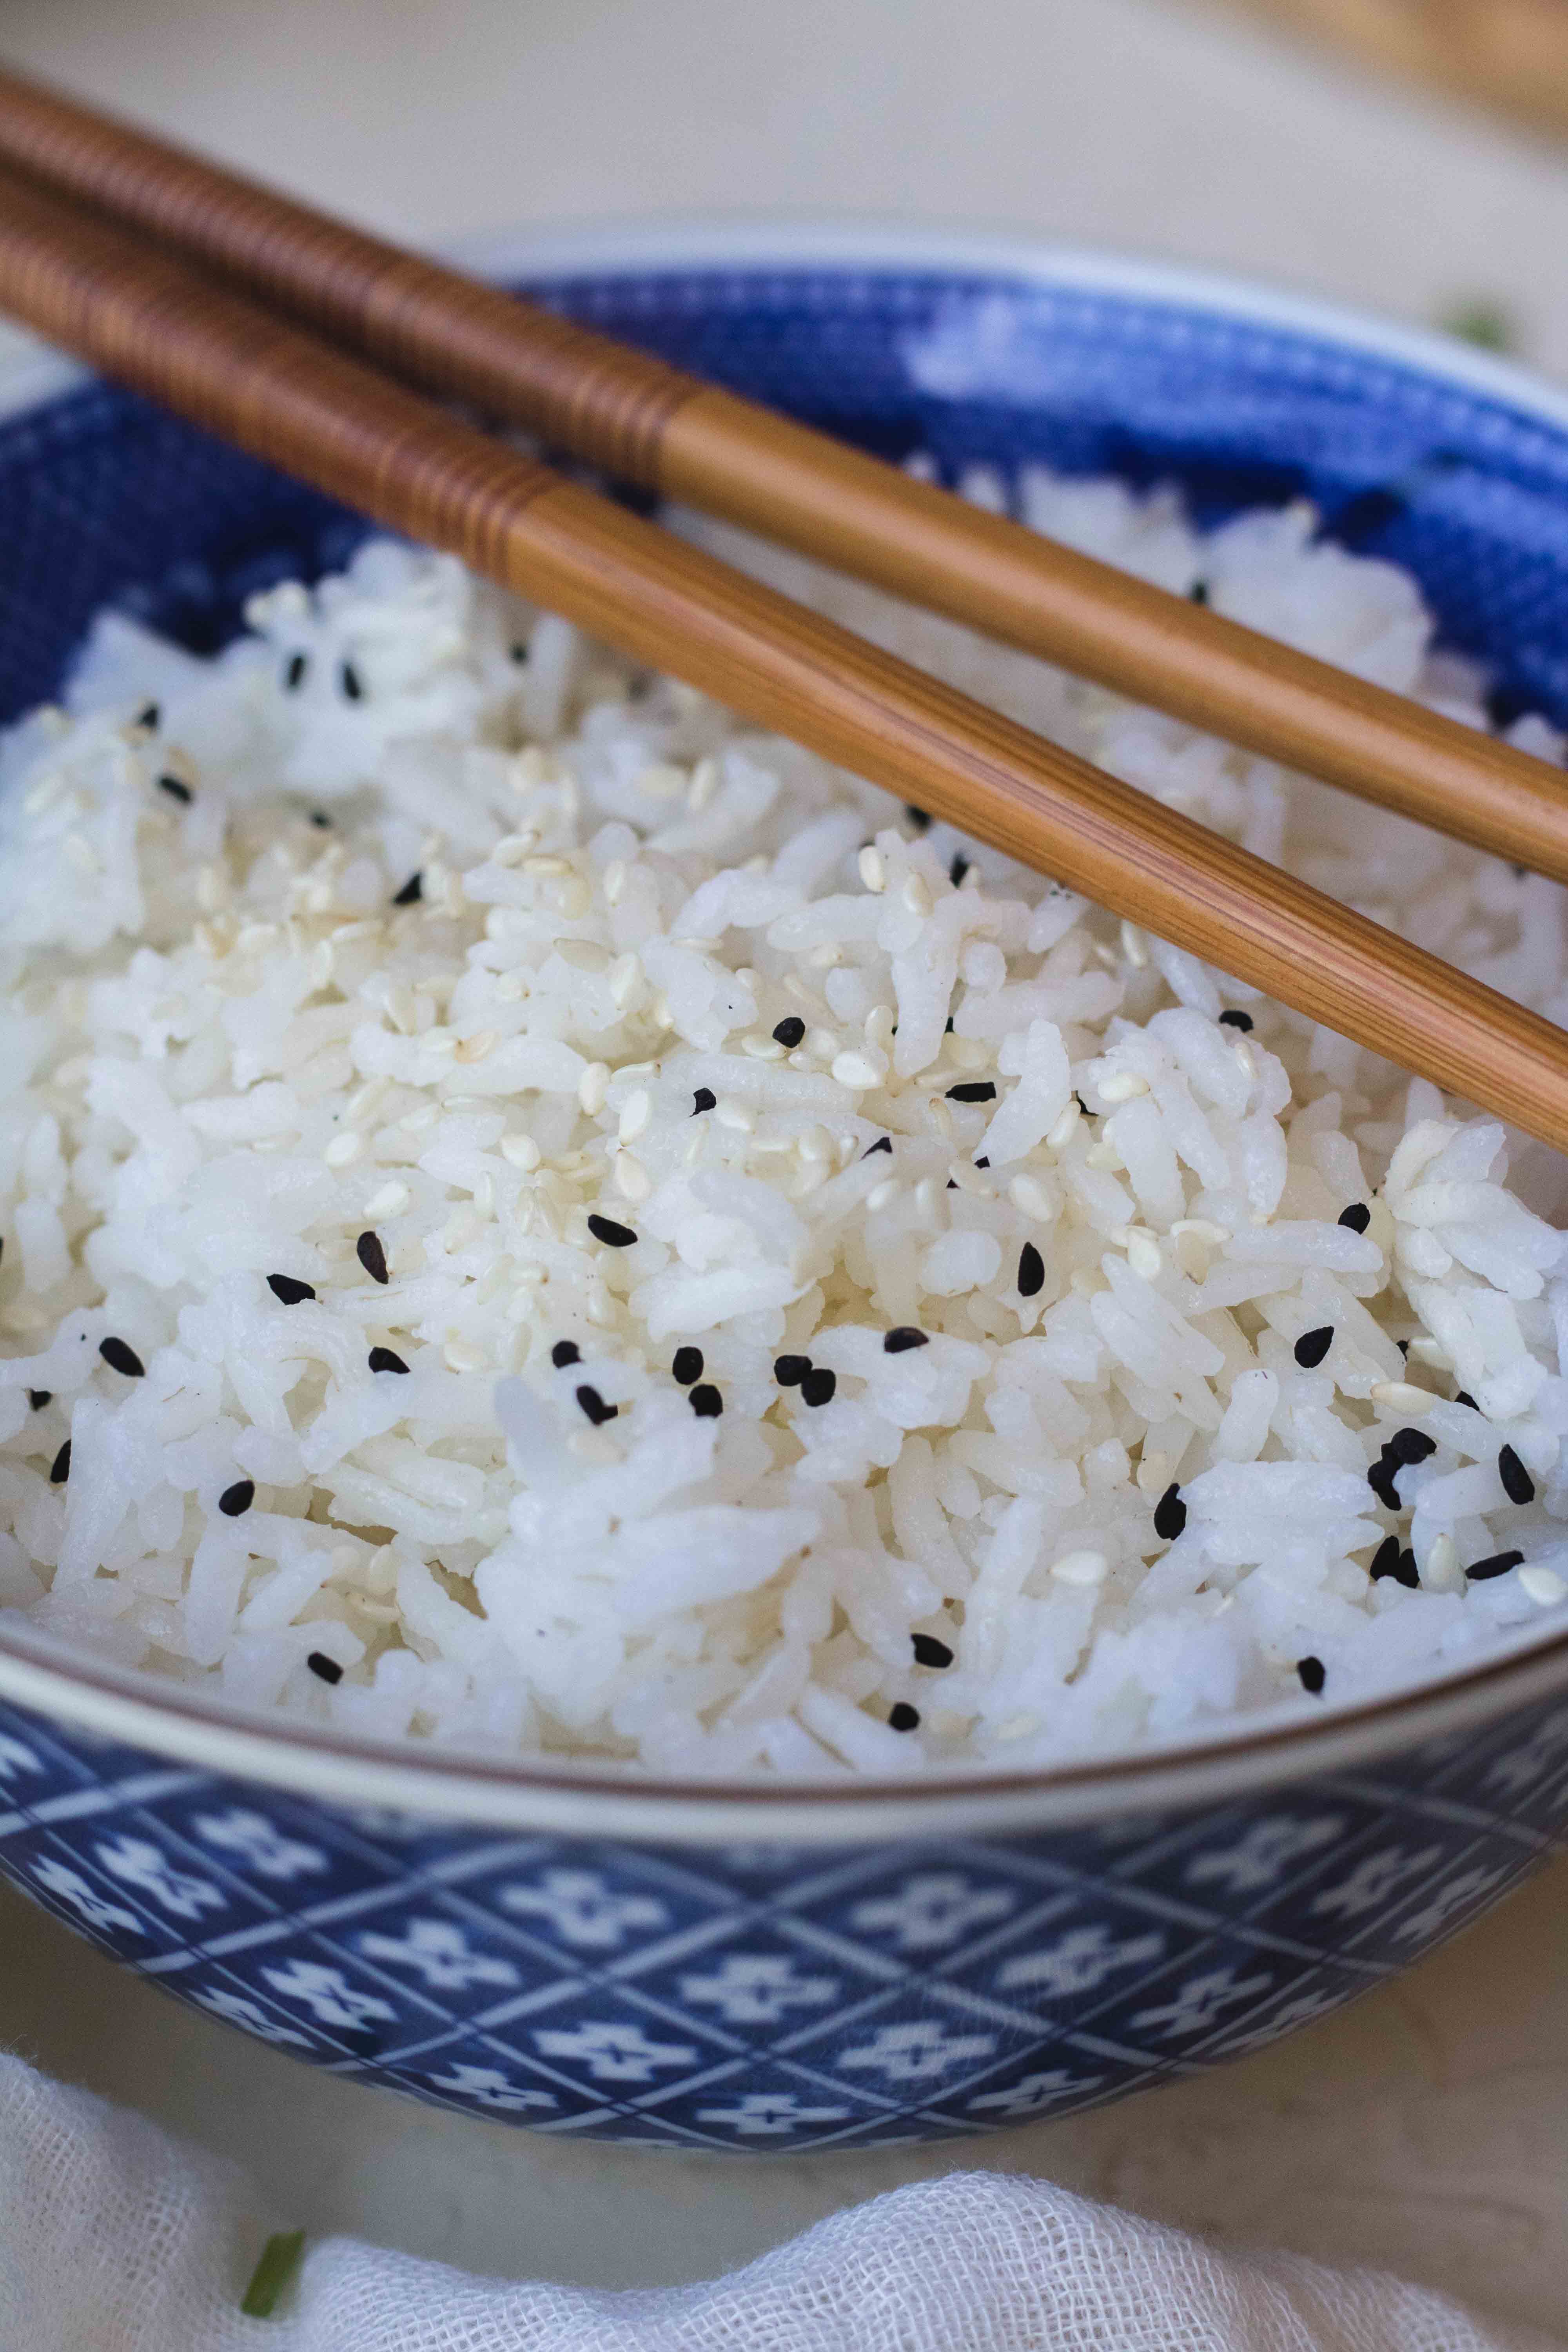 How To Cook Rice - Best Way to Make Rice On The Stove